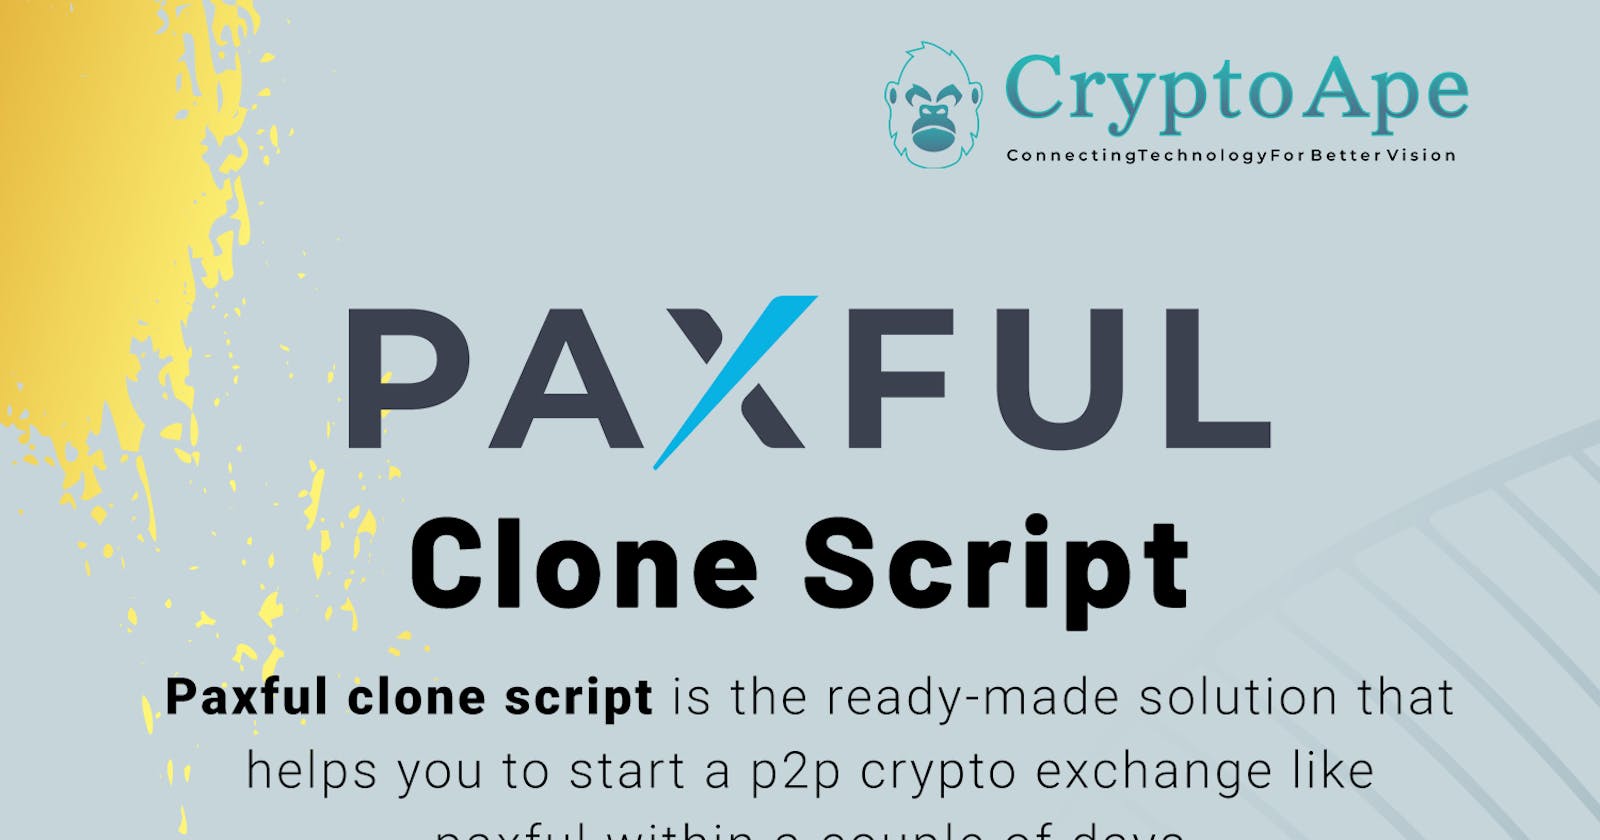 Launch A P2P Cryptocurrency Exchange like Paxful Today